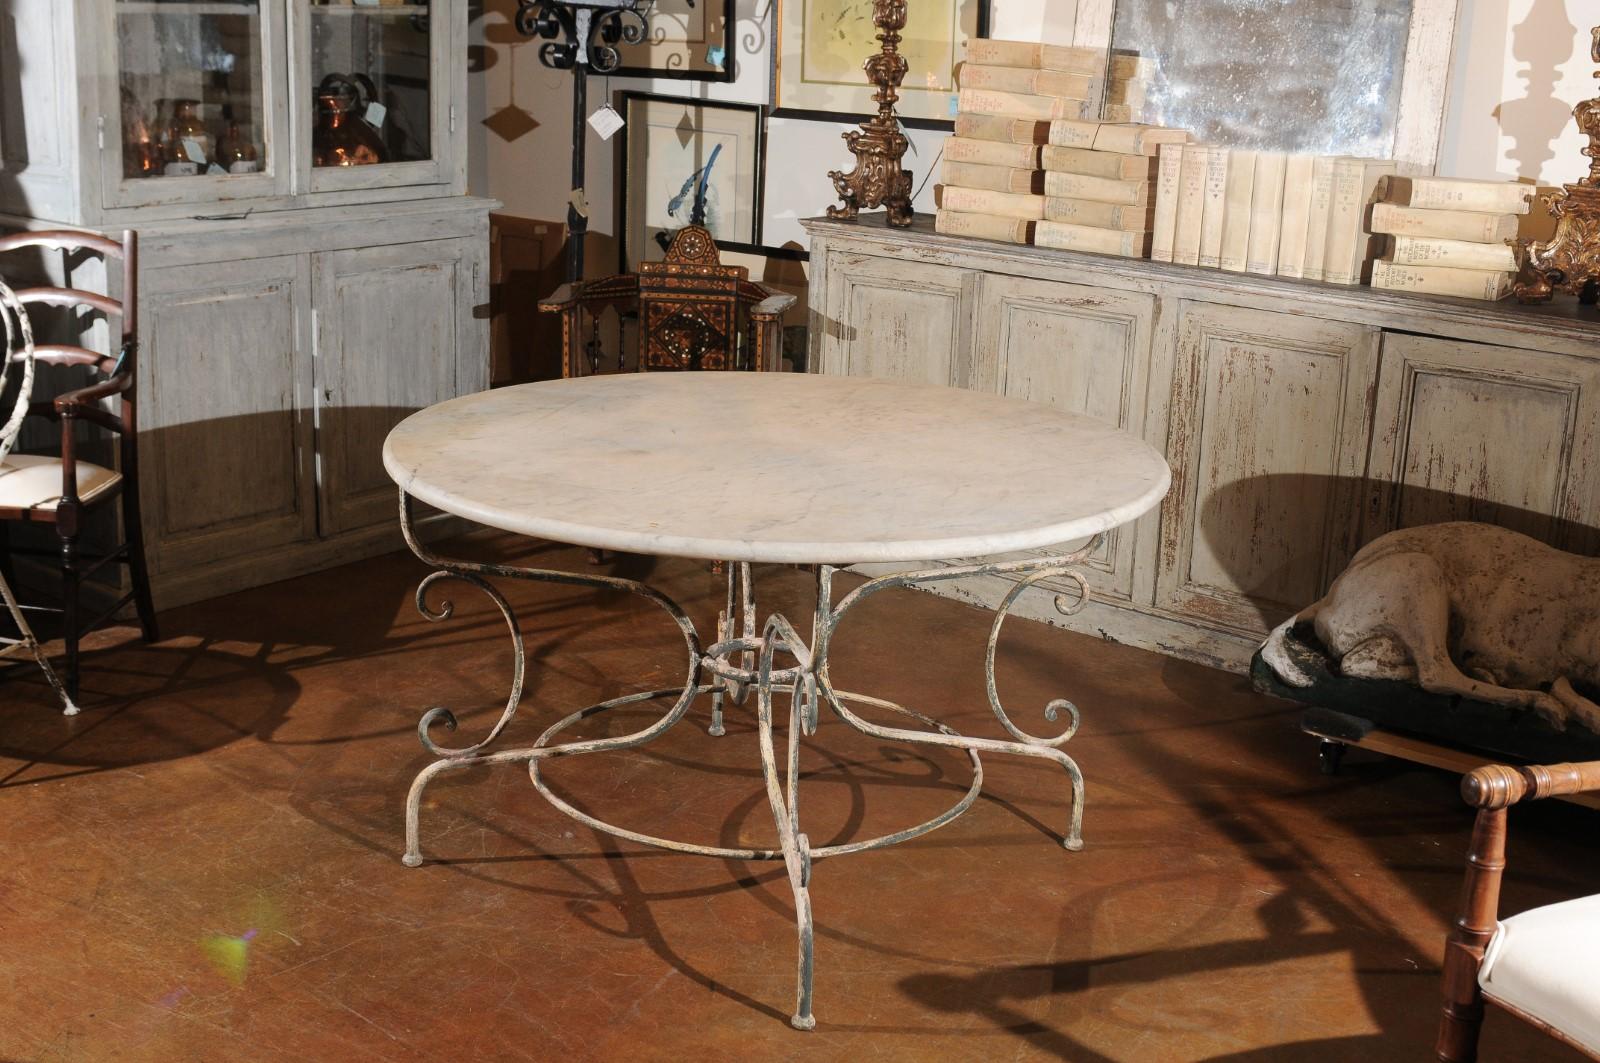 20th Century Vintage French Painted Iron Garden Table with Marble Top and Scrolled Base